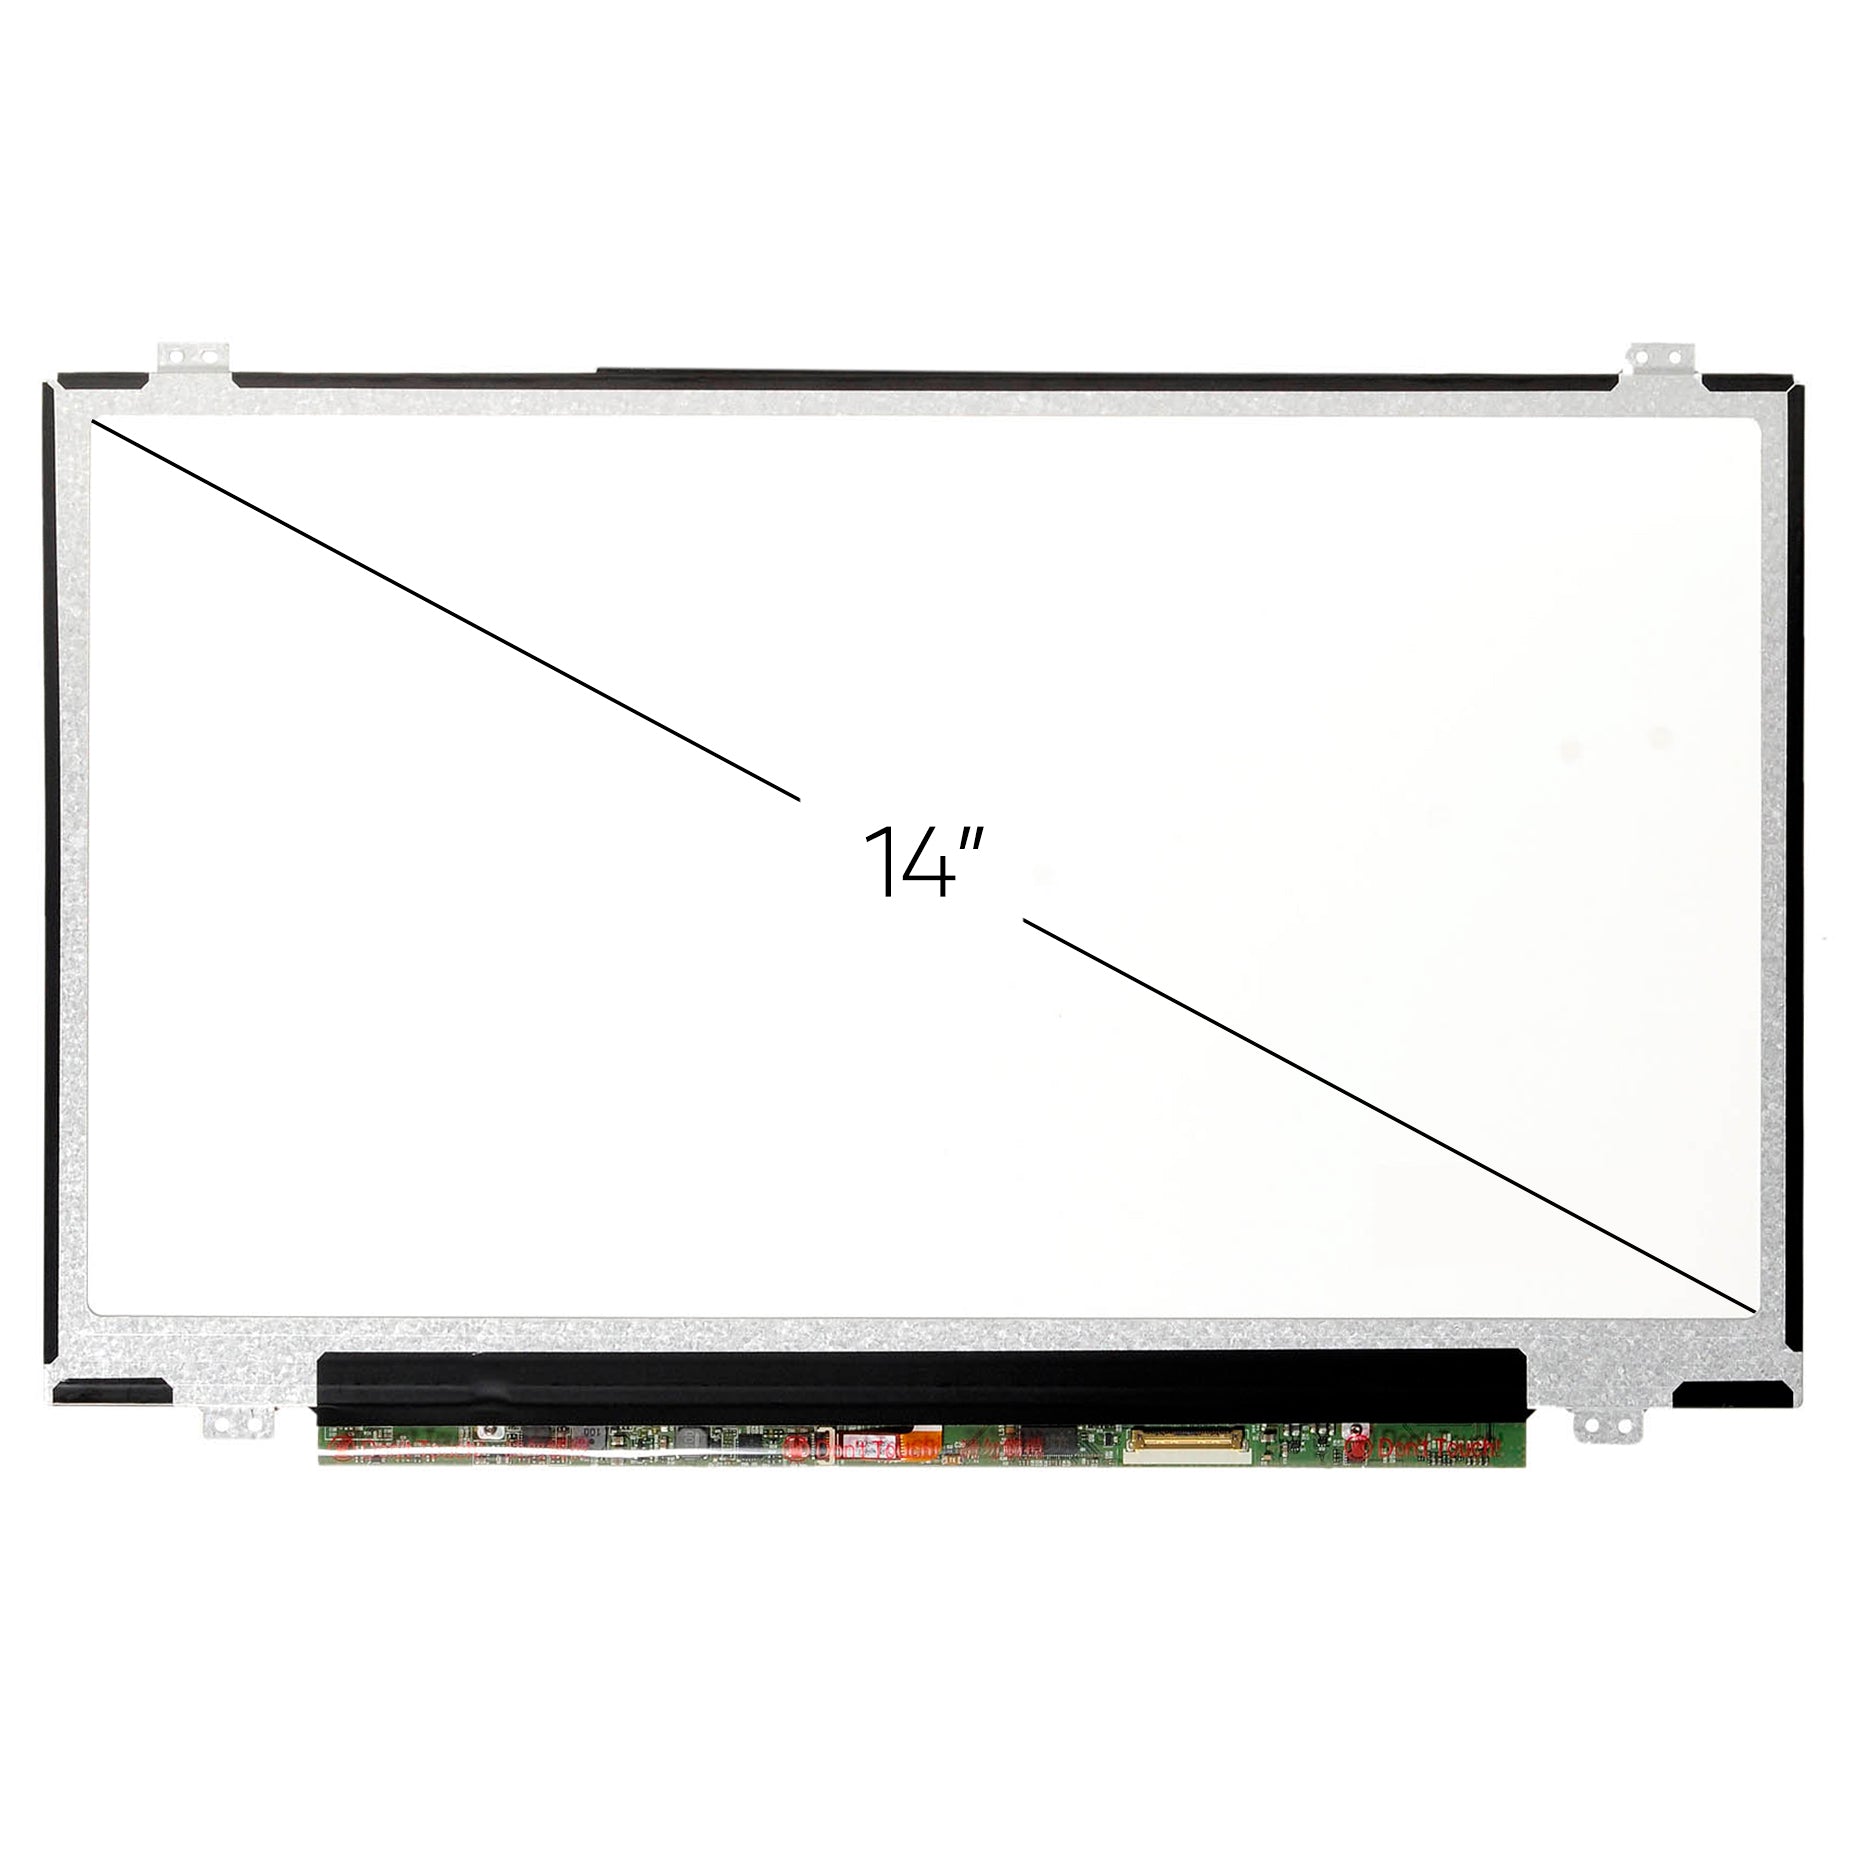 Screen Replacement for NV140FHM-N41 V8.0 FHD 1920x1080 IPS Matte LCD LED Display